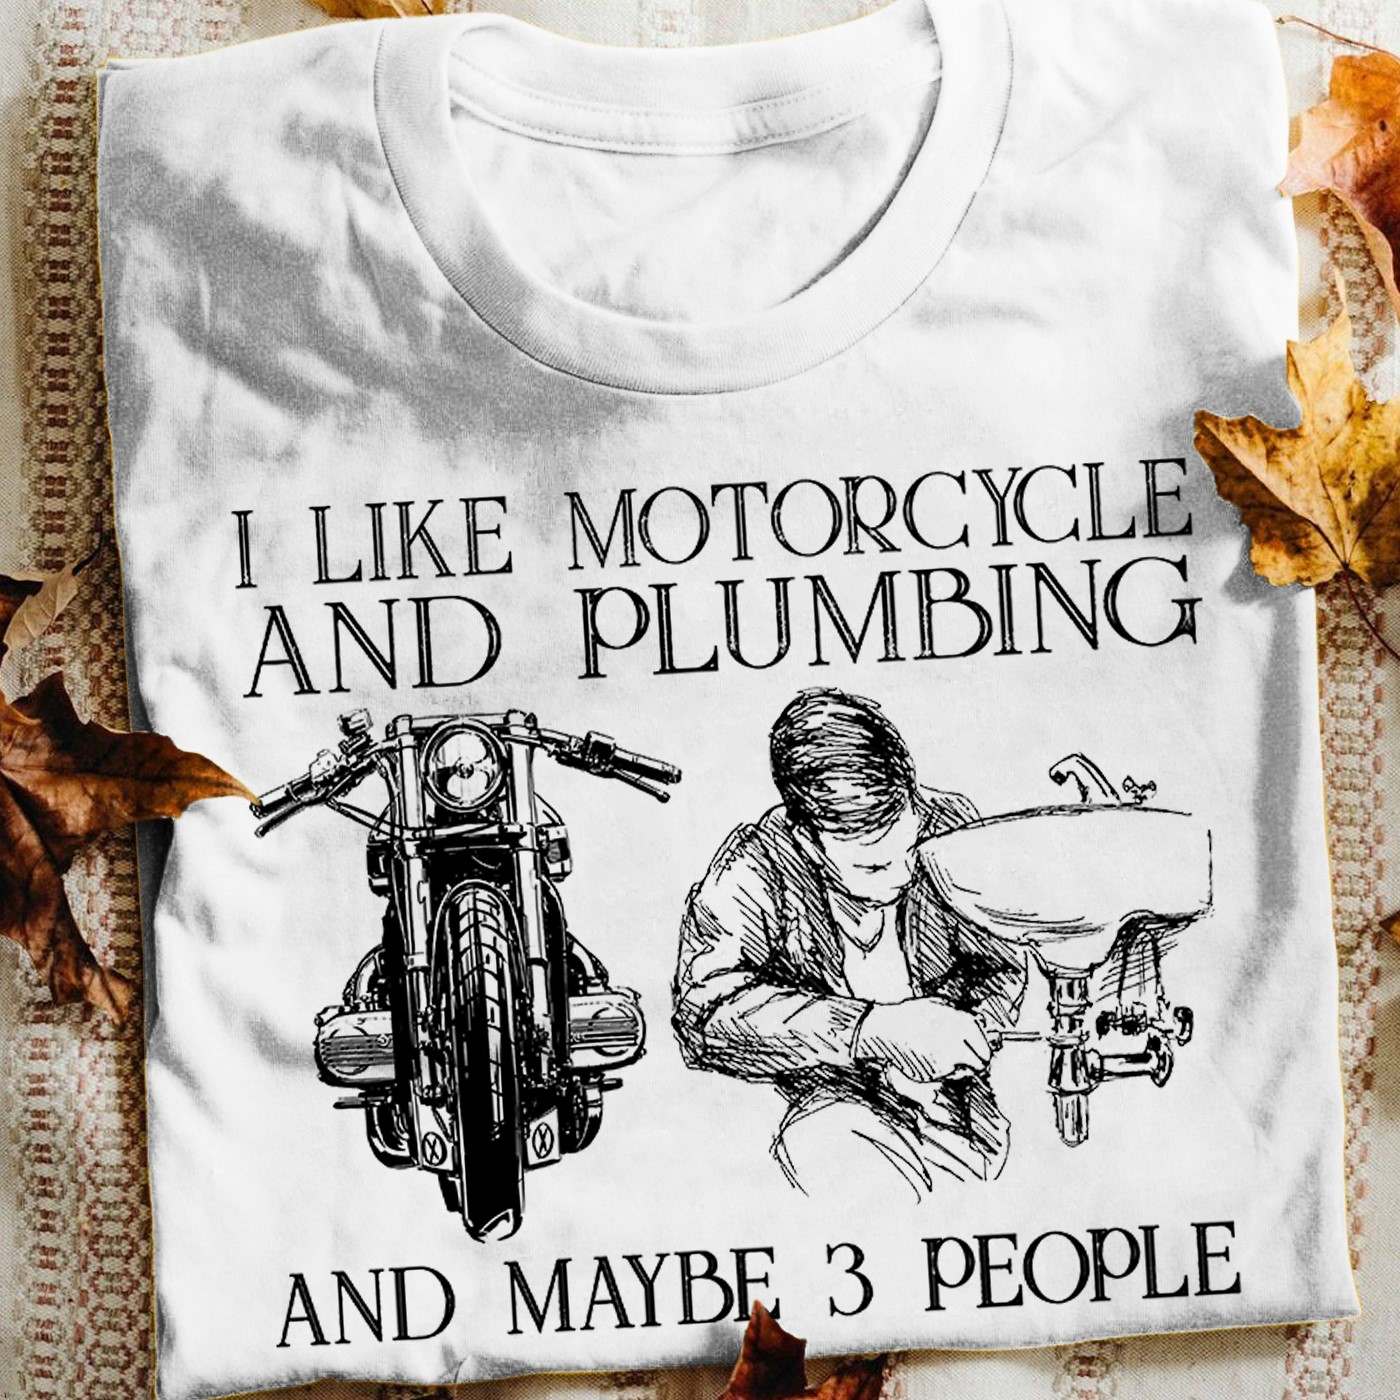 I like motorcycle and plumbing and maybe 3 people - The plumber